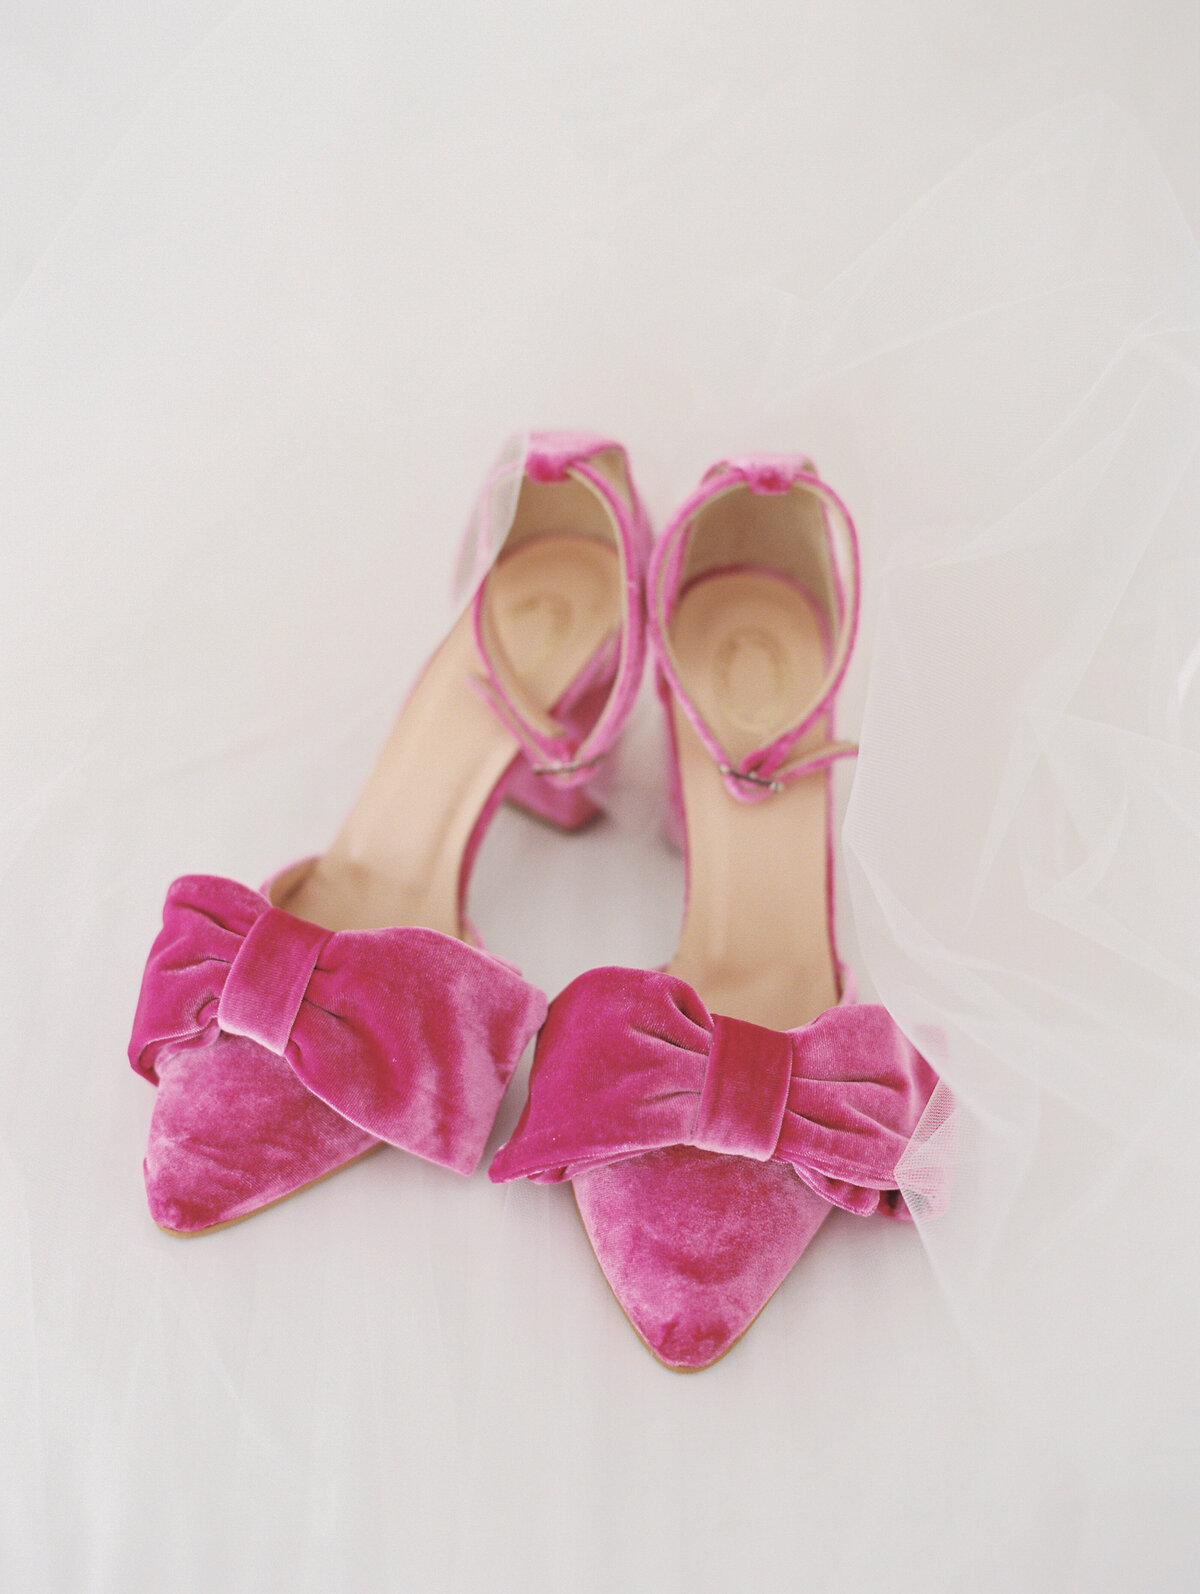 Pink shoes for wedding at The ViewPoint Hotel